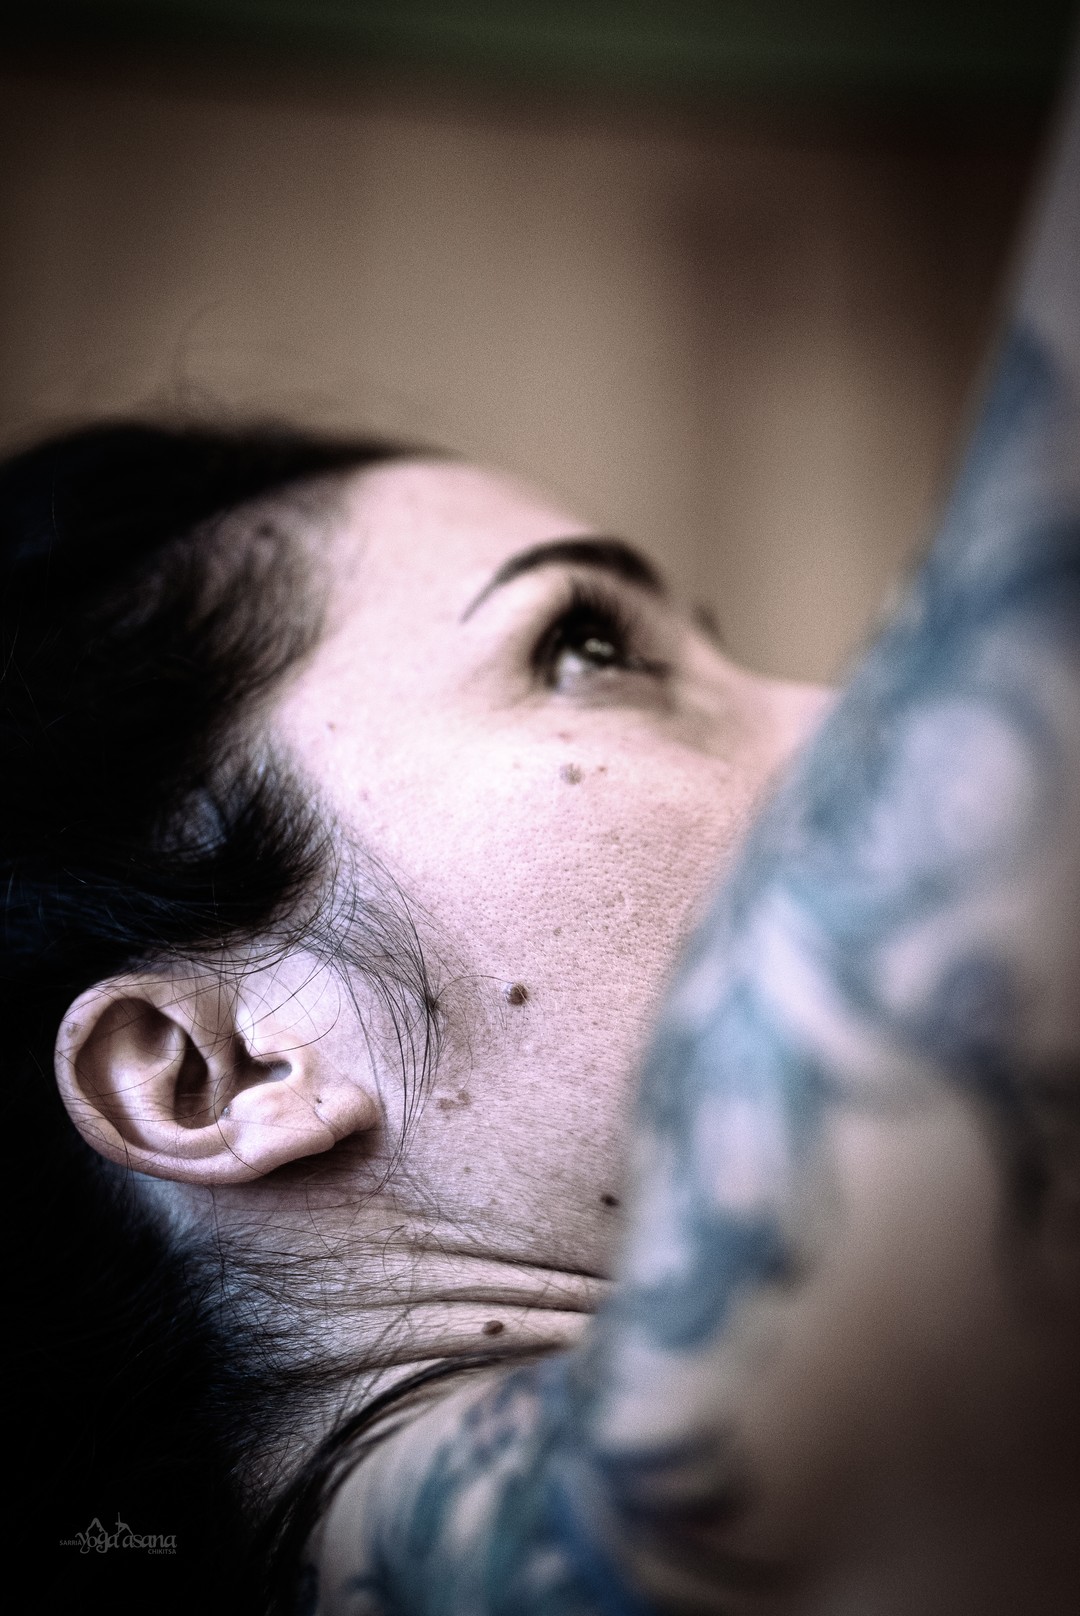 A close up of a woman with tattoos on her arm.